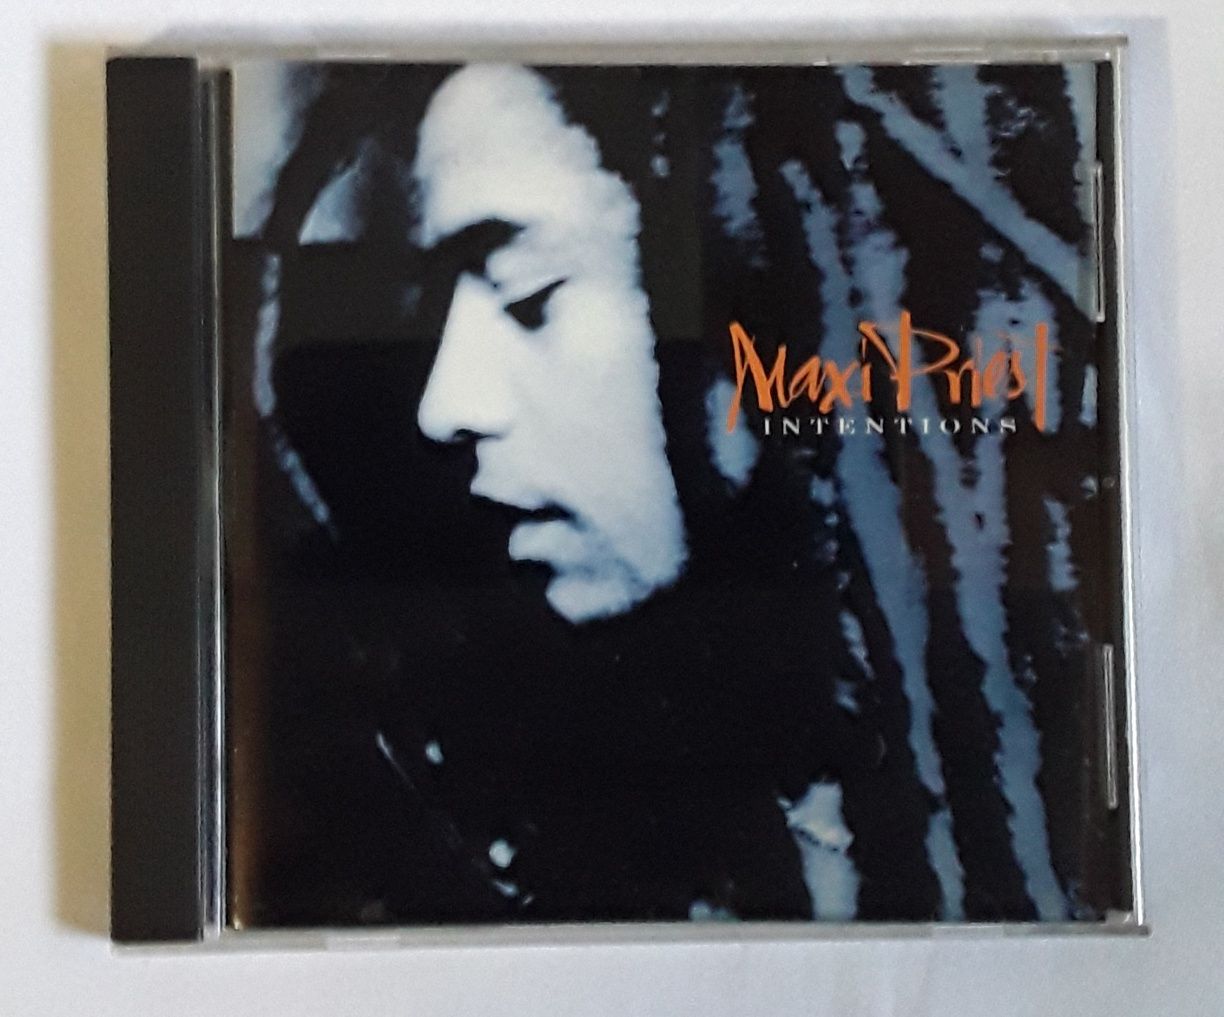 CD Maxi Priest - Intentions